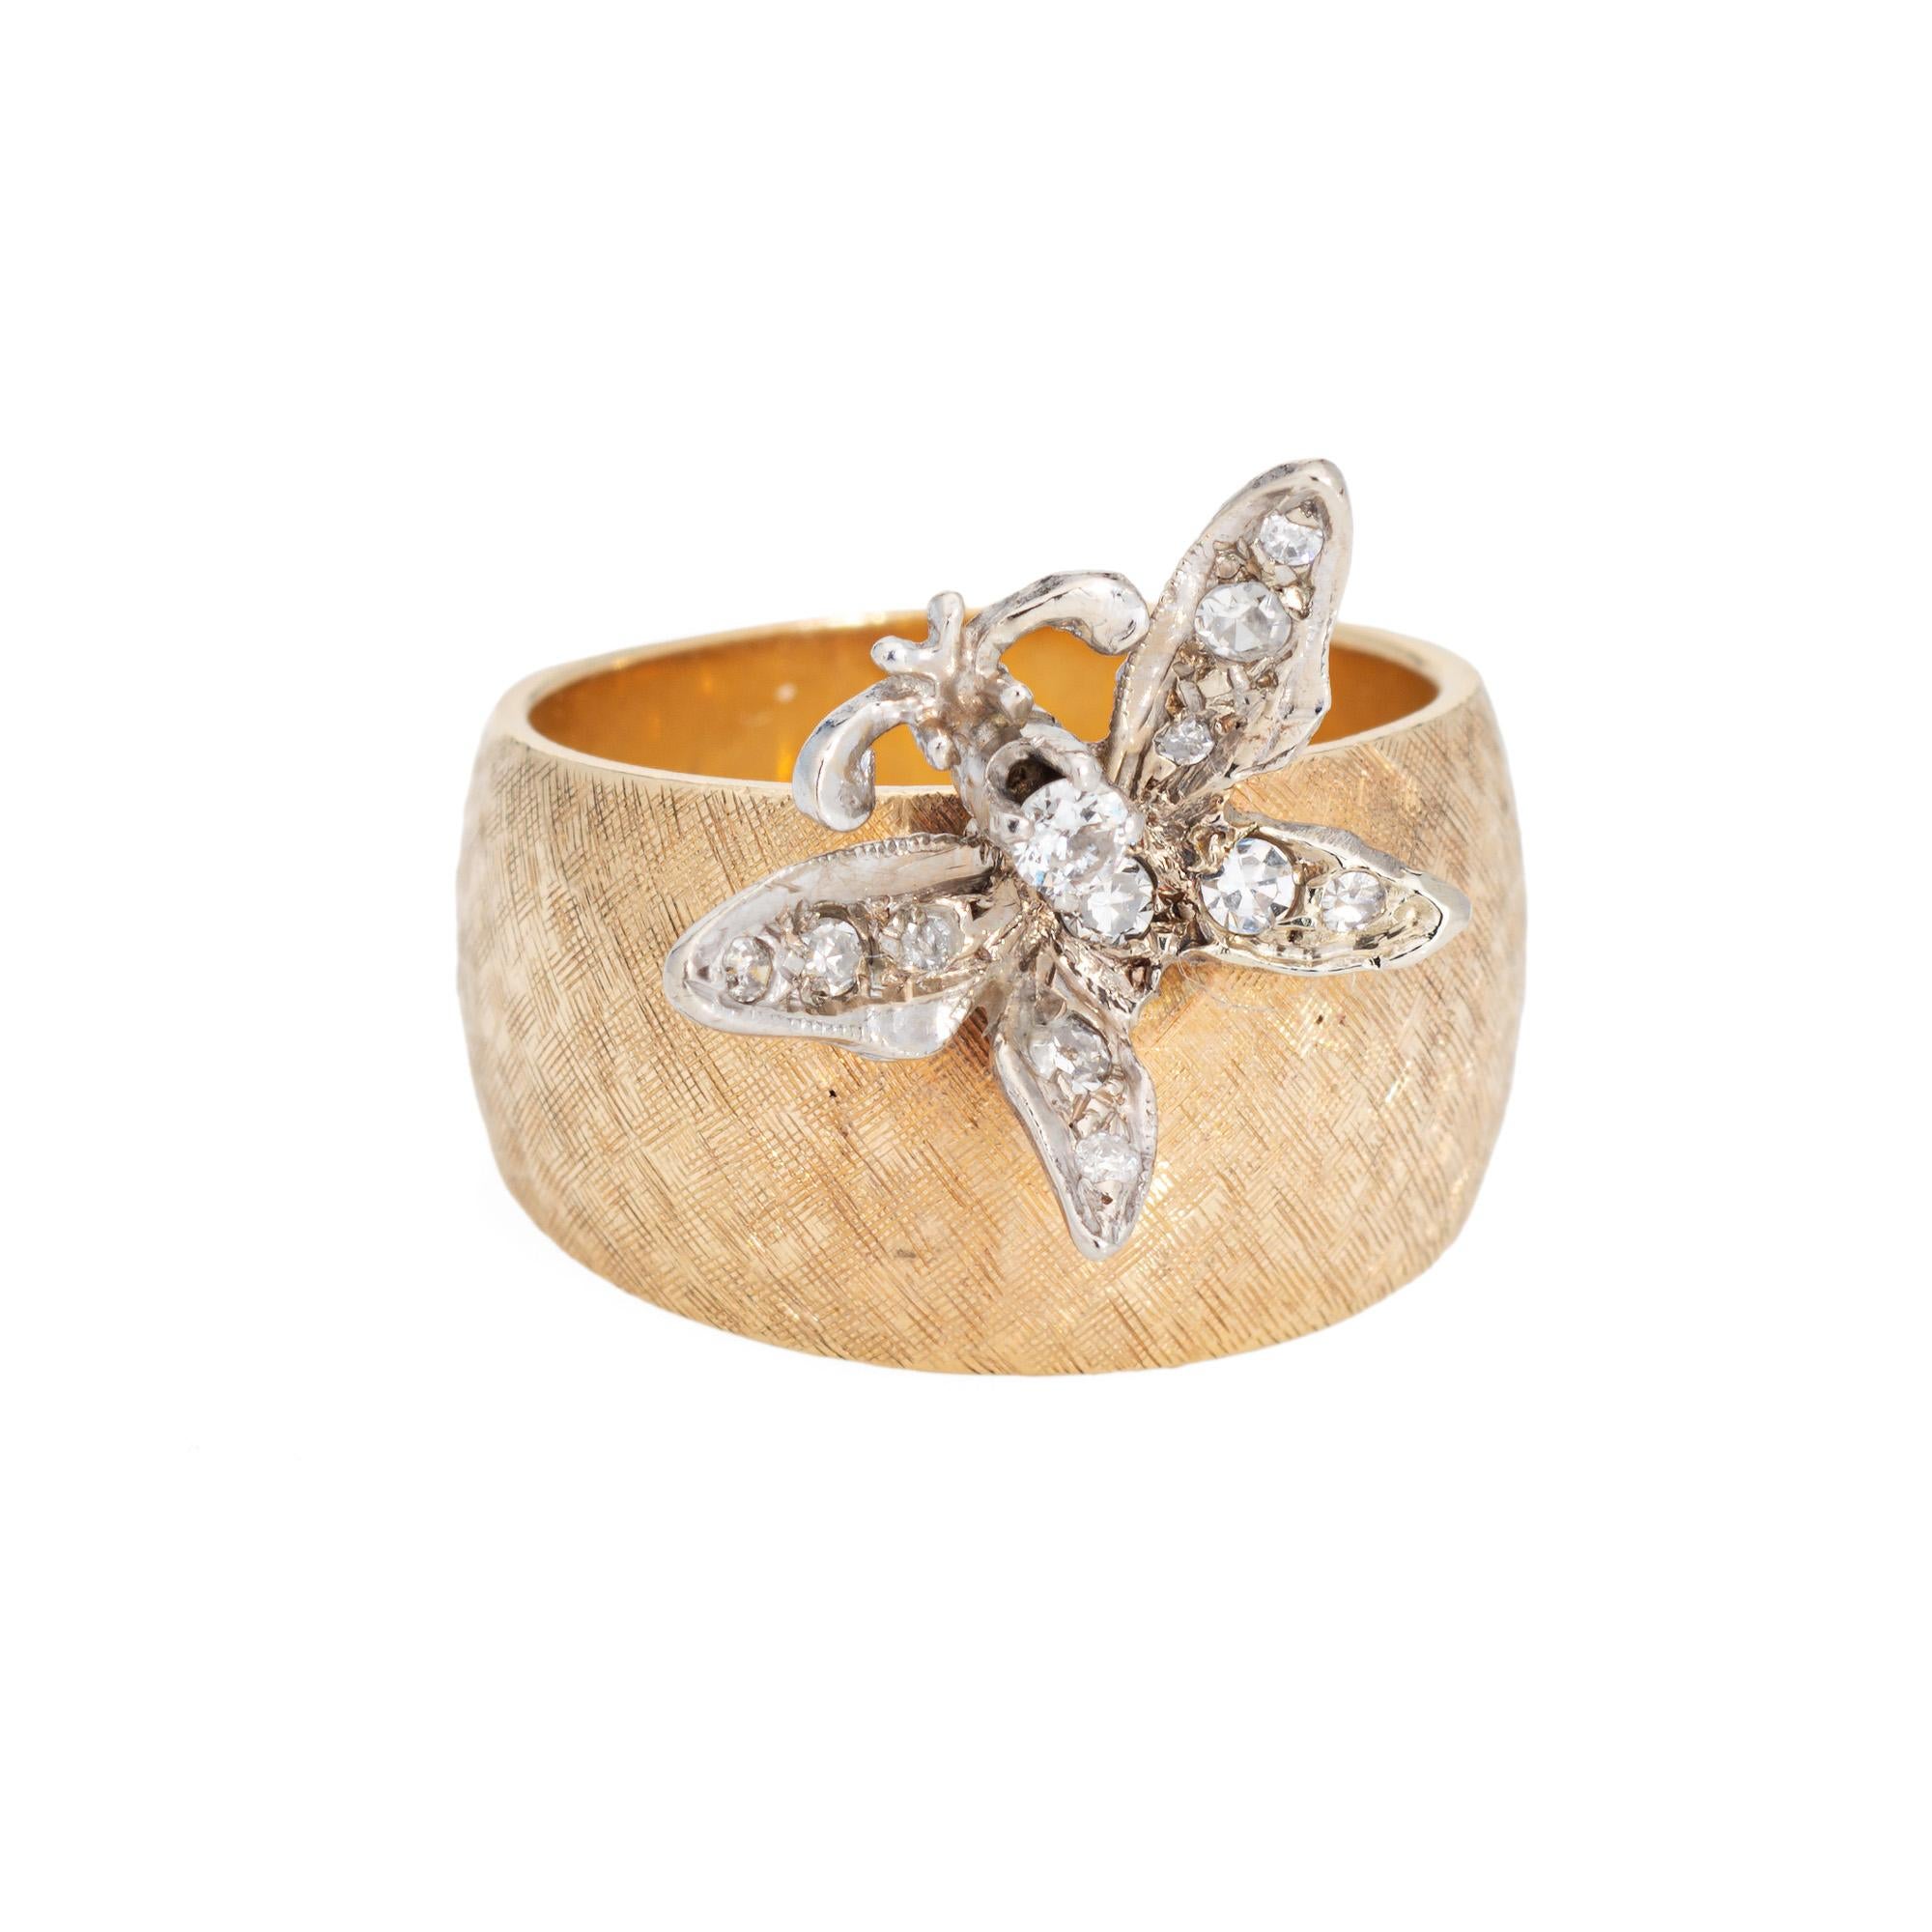 Stylish vintage butterfly ring (circa 1960s to 1970s) crafted in 14 karat yellow & white gold. 

12 diamonds total an estimated 0.10 carat (estimated at I-J color and SI1-I2 clarity). 

The sweet ring highlights a diamond set butterfly. Perched in a